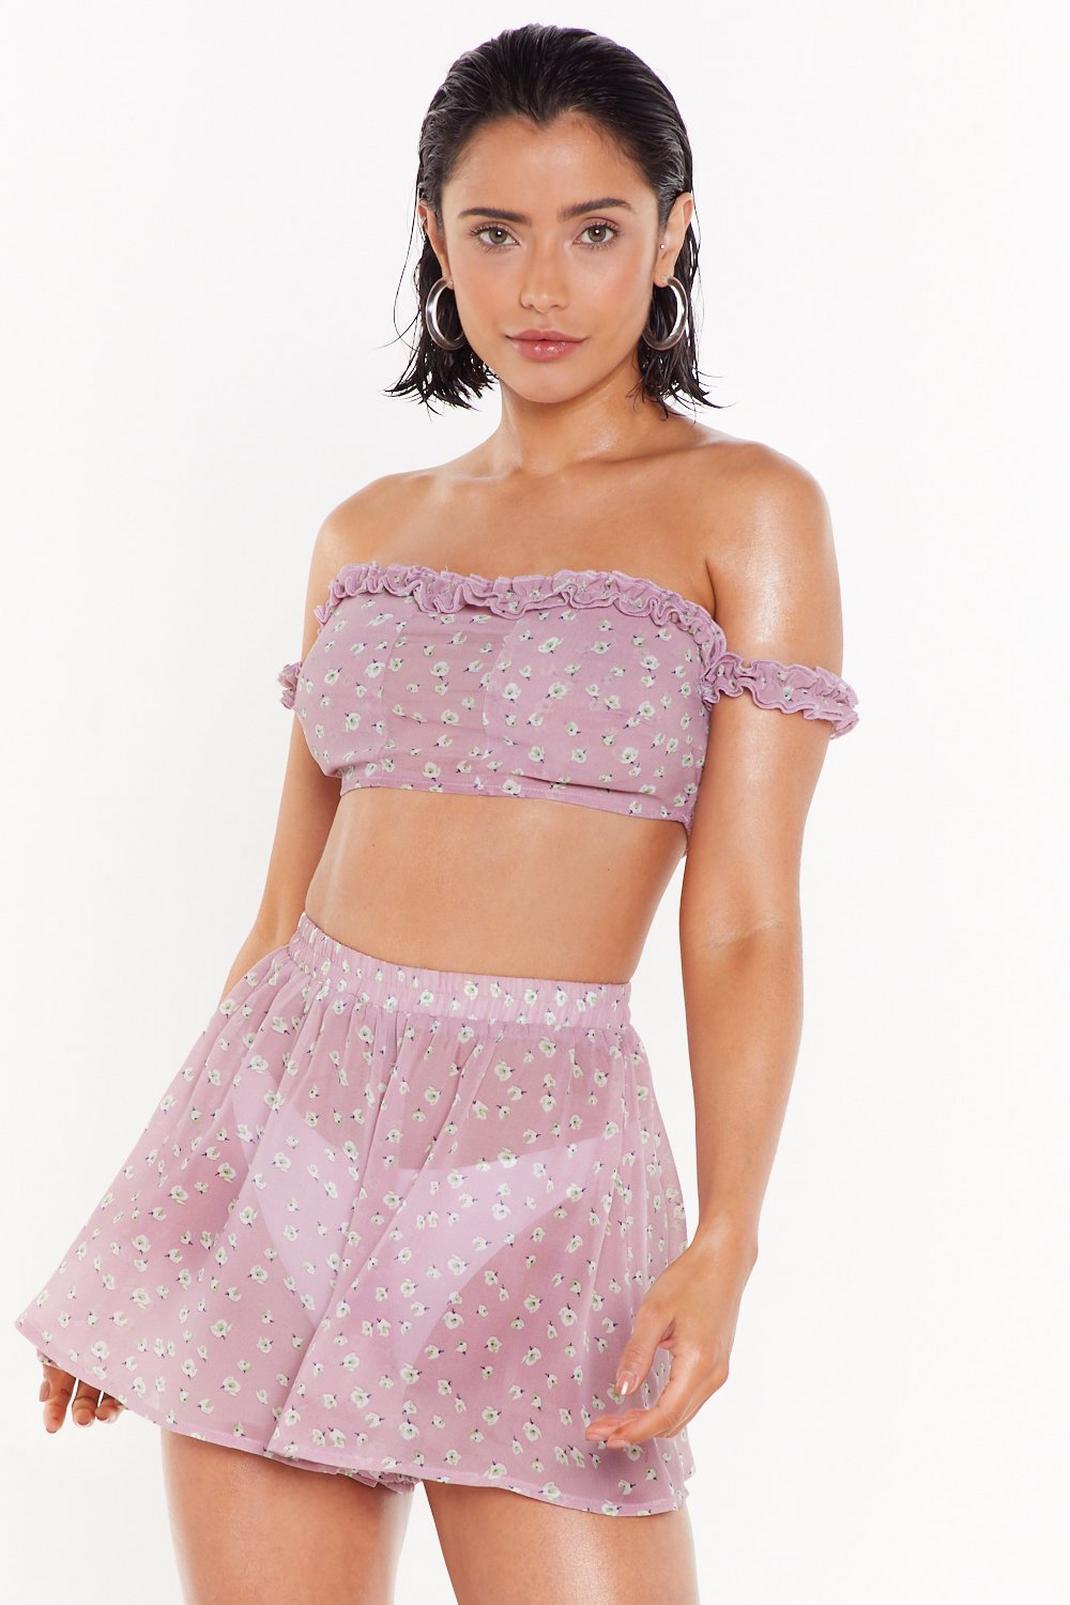 All About that Girl Flower Bandeau Top and Shorts Set image number 1